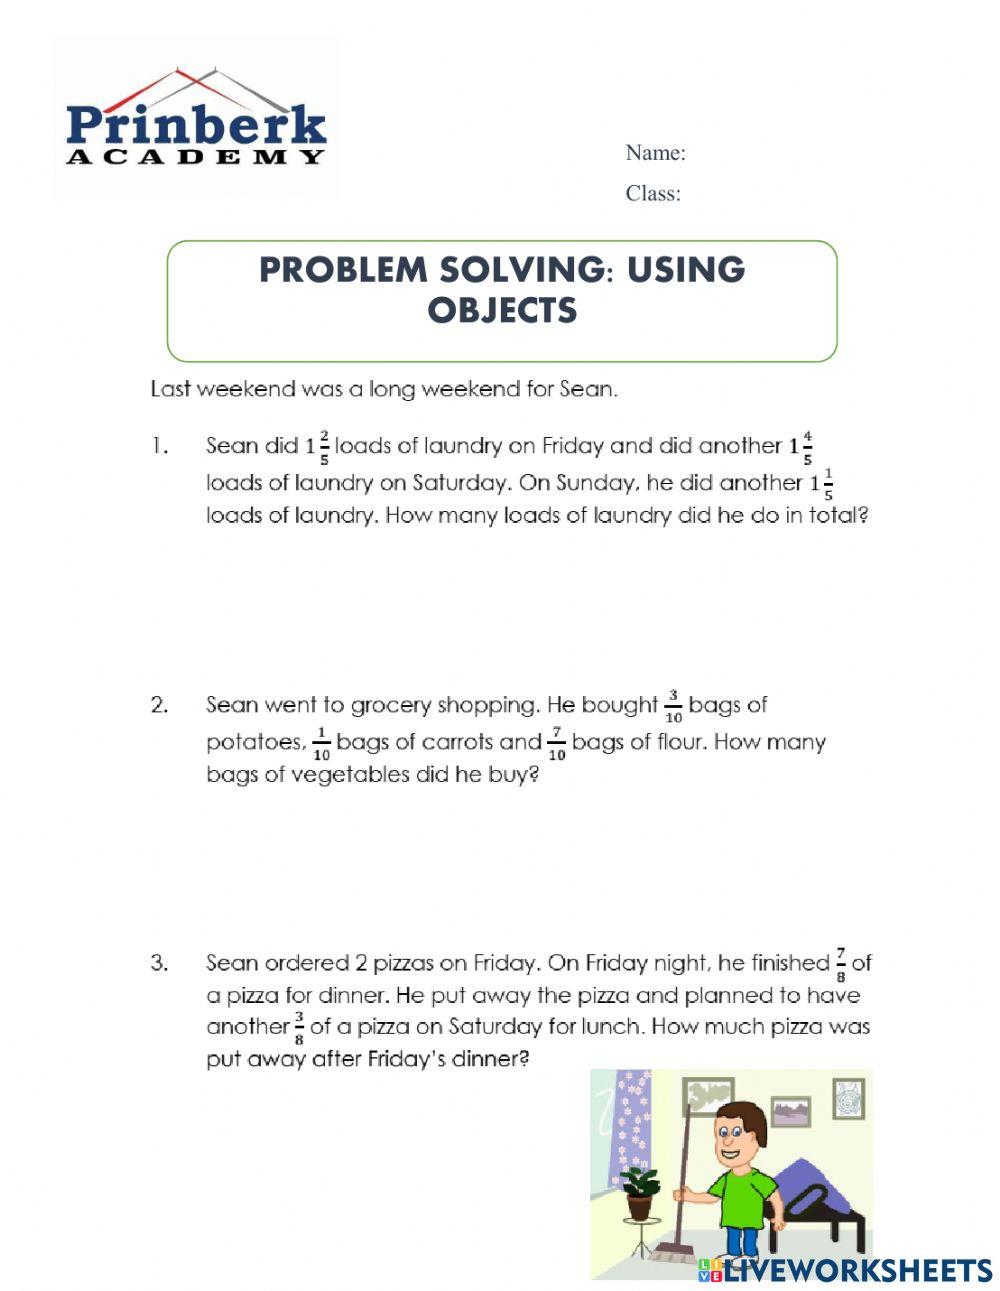 Problem Solving: Using Objects